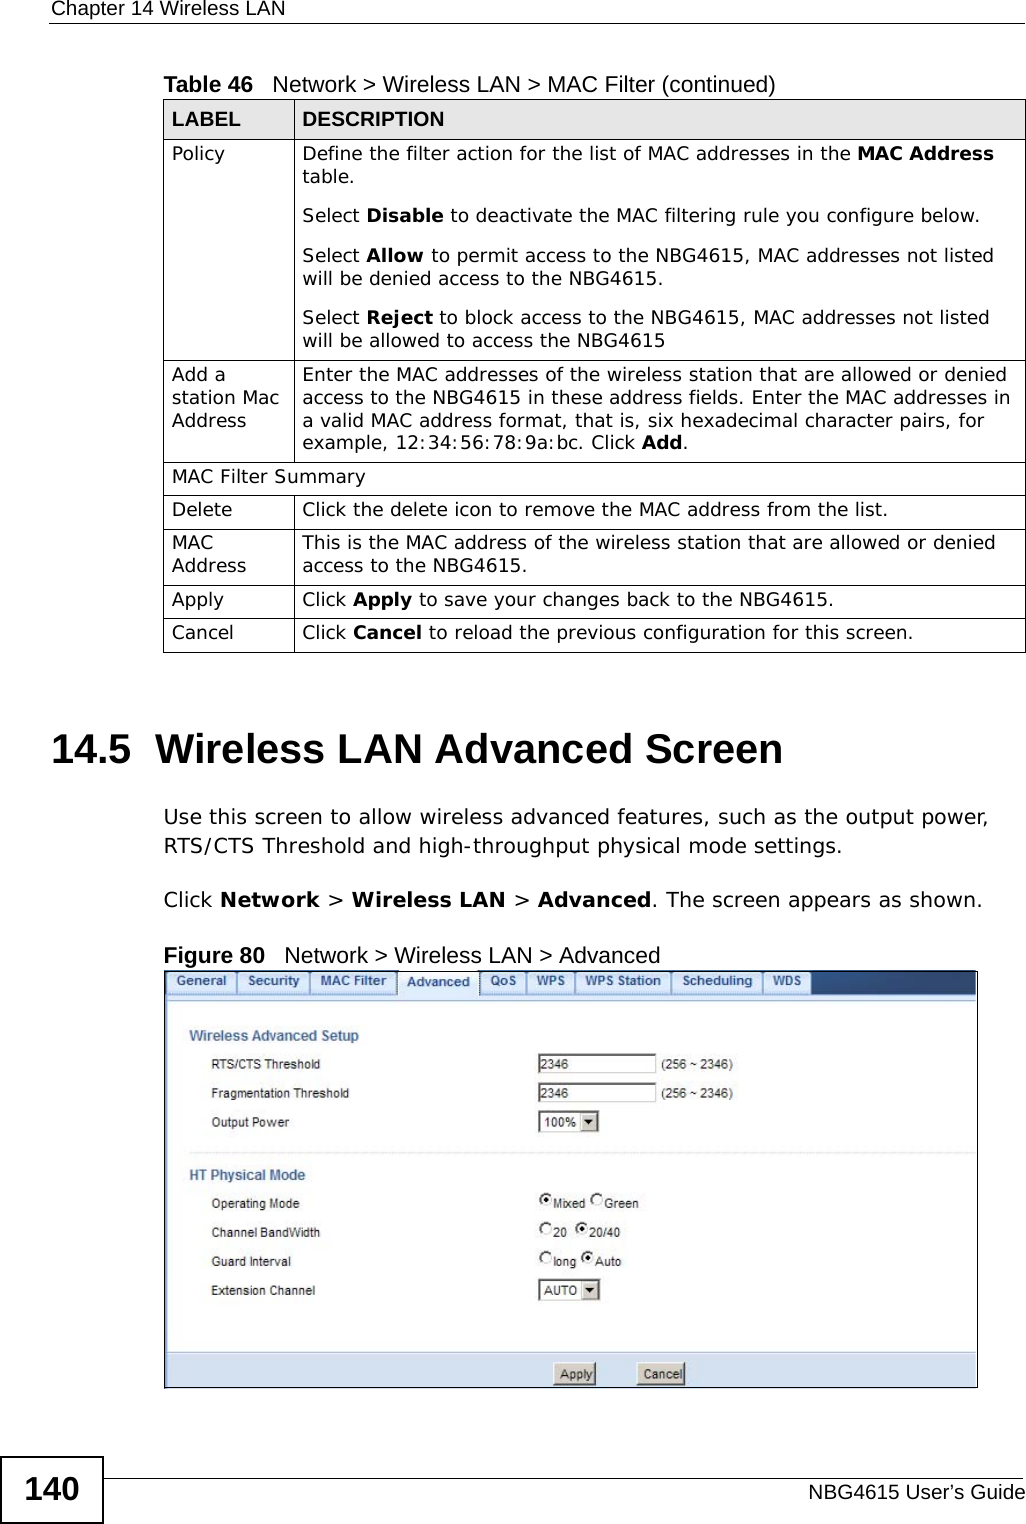 Chapter 14 Wireless LANNBG4615 User’s Guide14014.5  Wireless LAN Advanced ScreenUse this screen to allow wireless advanced features, such as the output power, RTS/CTS Threshold and high-throughput physical mode settings.Click Network &gt; Wireless LAN &gt; Advanced. The screen appears as shown.Figure 80   Network &gt; Wireless LAN &gt; AdvancedPolicy  Define the filter action for the list of MAC addresses in the MAC Address table. Select Disable to deactivate the MAC filtering rule you configure below.Select Allow to permit access to the NBG4615, MAC addresses not listed will be denied access to the NBG4615. Select Reject to block access to the NBG4615, MAC addresses not listed will be allowed to access the NBG4615 Add a station Mac AddressEnter the MAC addresses of the wireless station that are allowed or denied access to the NBG4615 in these address fields. Enter the MAC addresses in a valid MAC address format, that is, six hexadecimal character pairs, for example, 12:34:56:78:9a:bc. Click Add.MAC Filter SummaryDelete Click the delete icon to remove the MAC address from the list.MAC Address This is the MAC address of the wireless station that are allowed or denied access to the NBG4615.Apply Click Apply to save your changes back to the NBG4615.Cancel Click Cancel to reload the previous configuration for this screen.Table 46   Network &gt; Wireless LAN &gt; MAC Filter (continued)LABEL DESCRIPTION